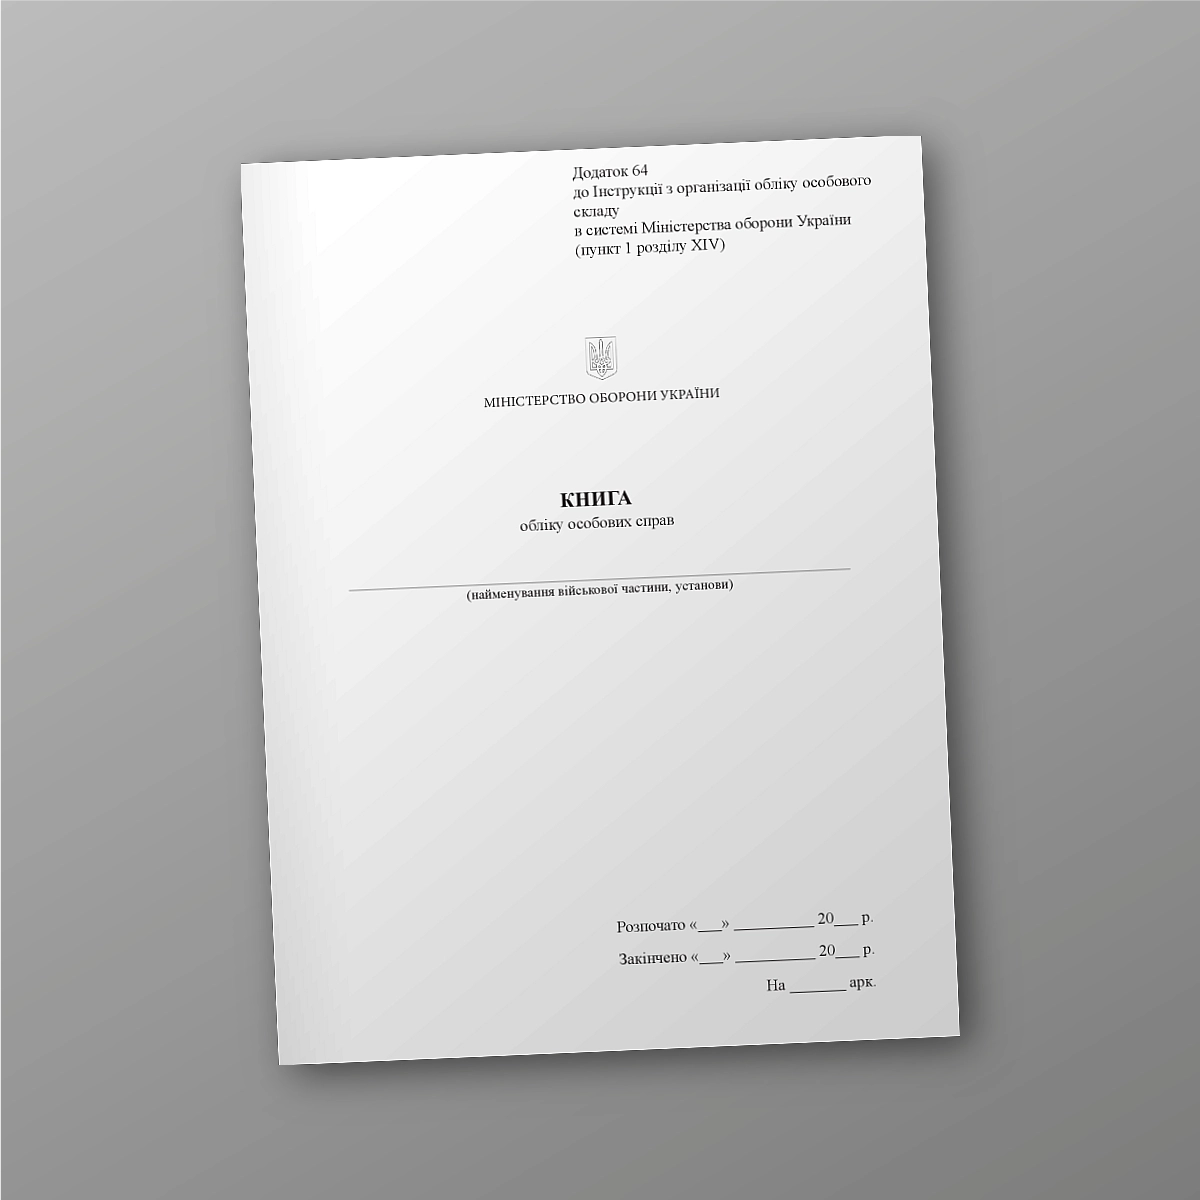 Book of accounting of personal affairs | PrintTo: